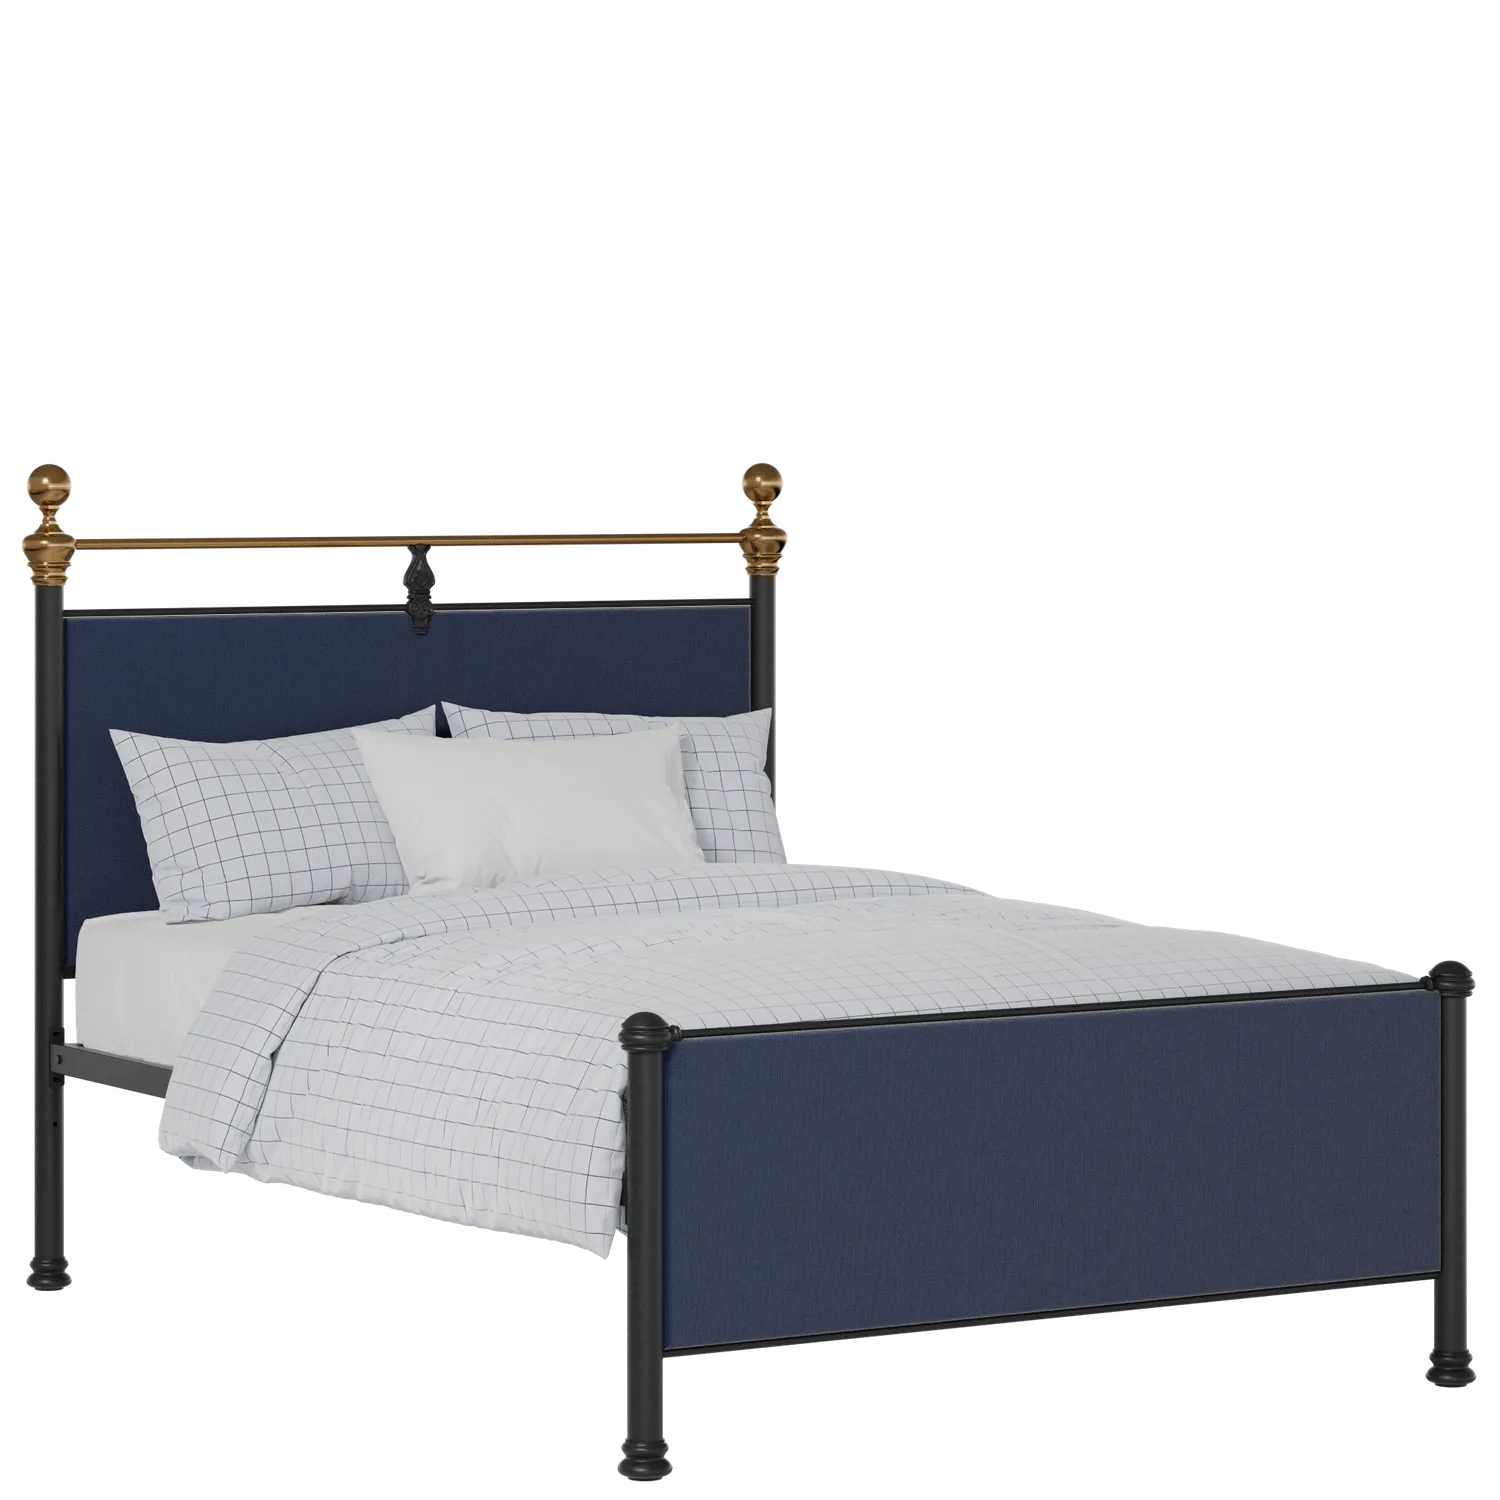 Bastille iron/metal upholstered bed in black with blue fabric